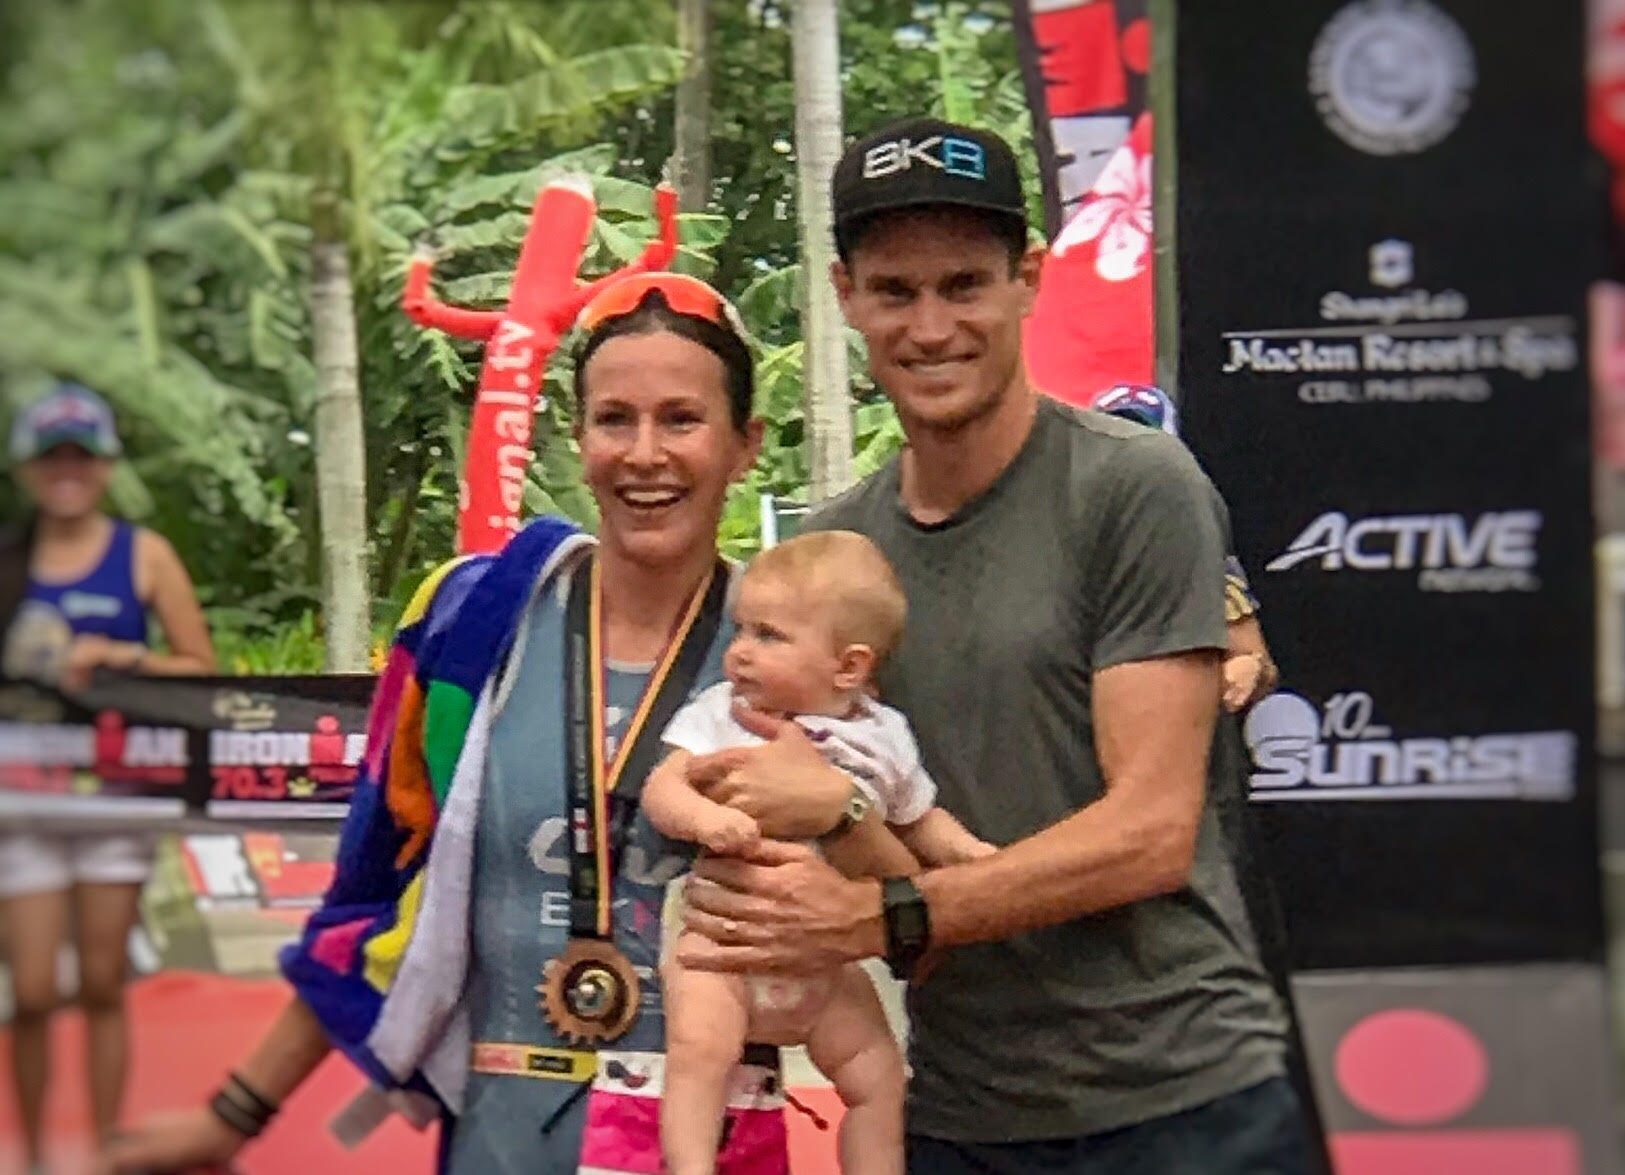 HAPPY FAMILY. Radka Kahlefeldt's husband and 7-month old daughter Ruby celebrate the women's pro champion's title at the finish line. Photo by Beatrice Go/Rappler  